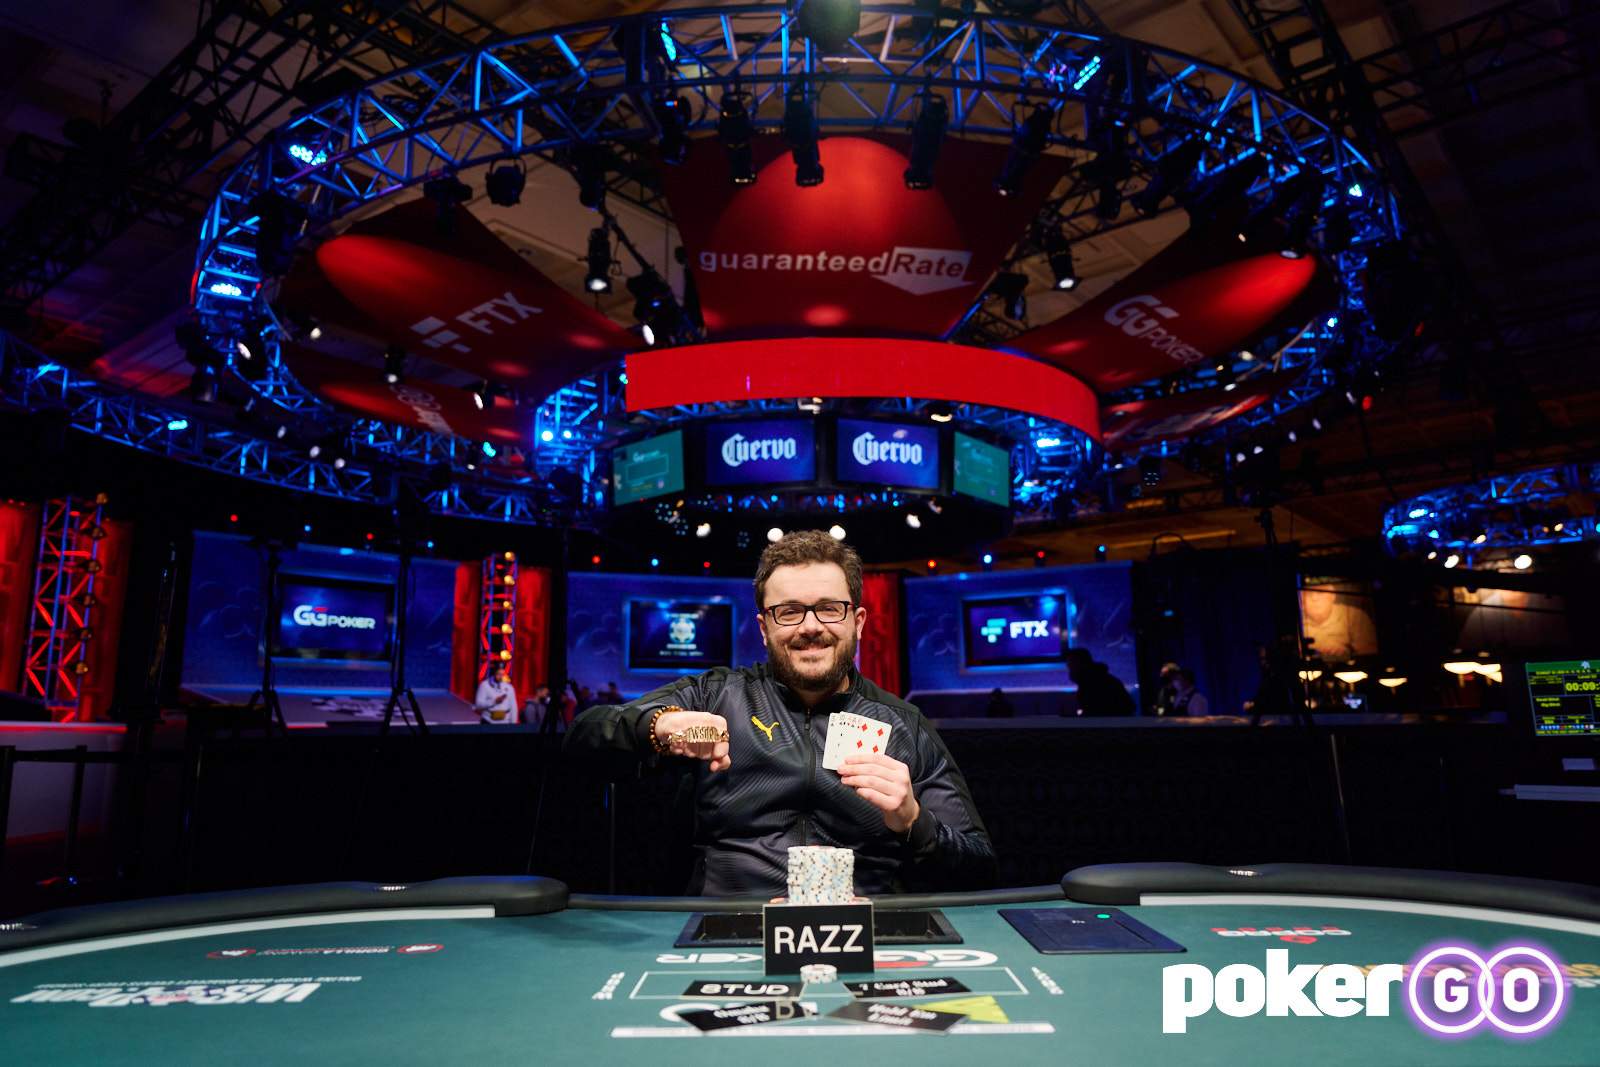 Anthony Zinno Does It Again, Winning for the Second Time at the 2021 WSOP